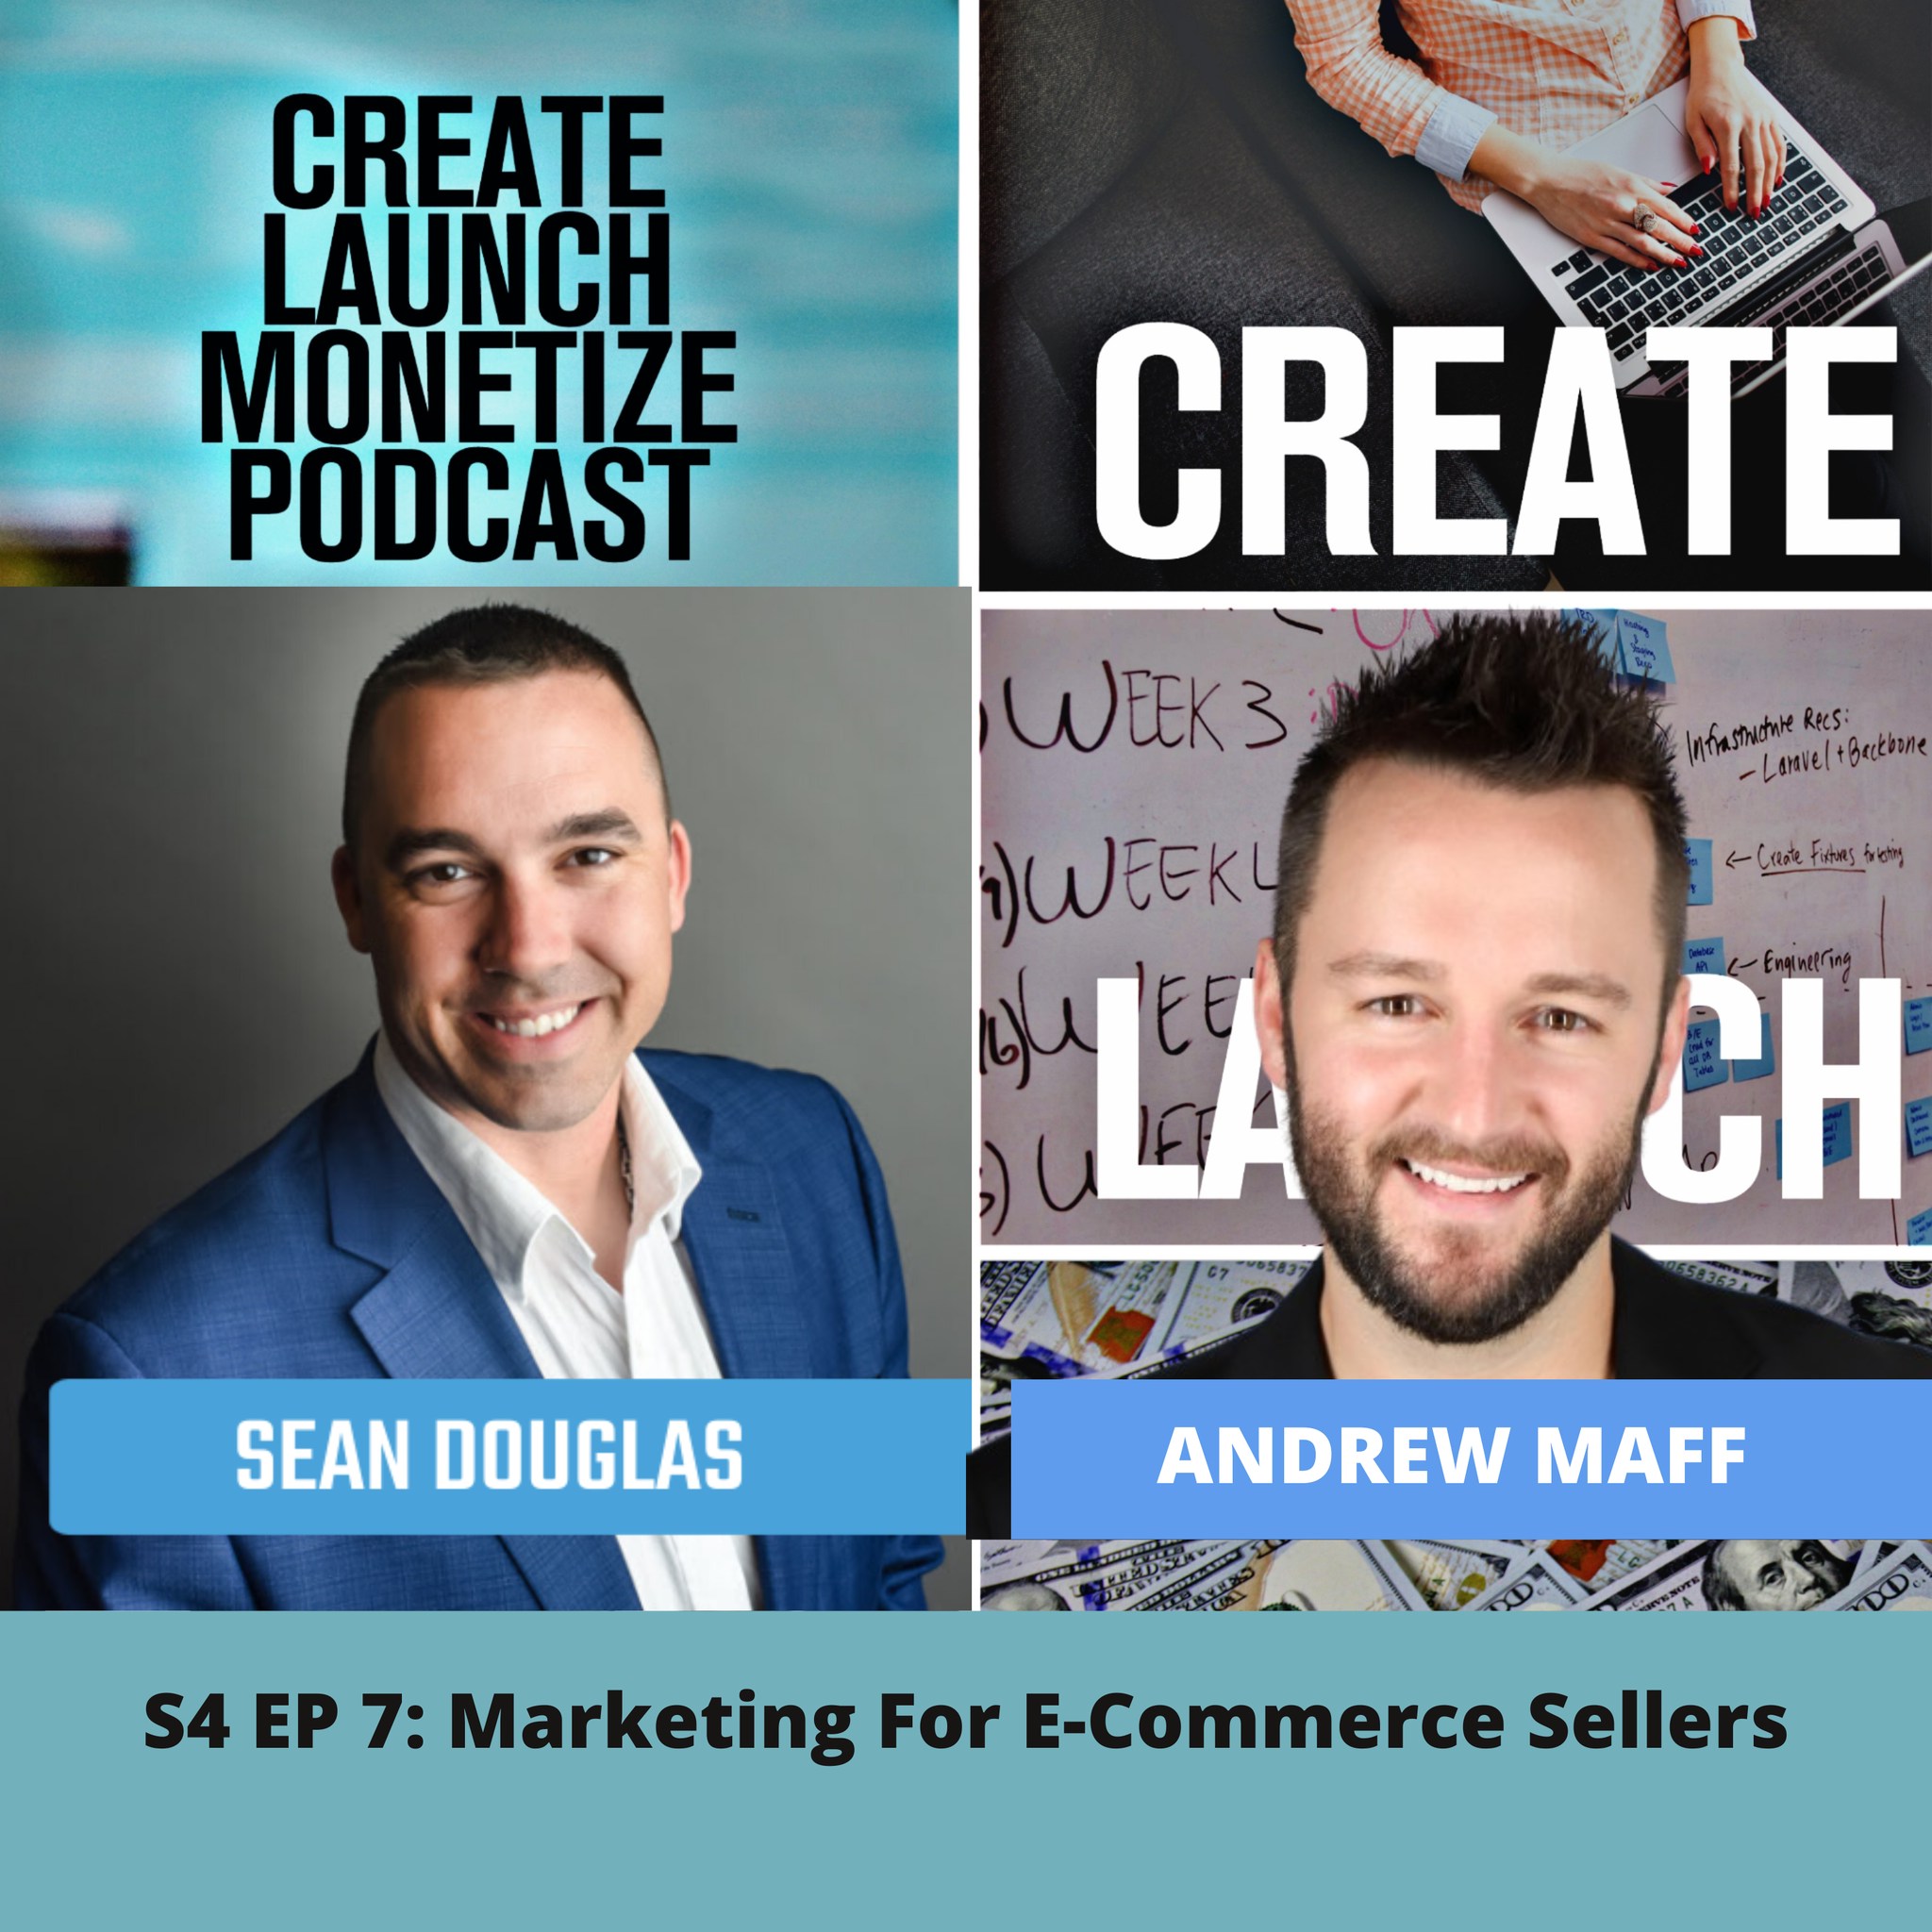 Marketing For E-Commerce Sellers with Andrew Maff: S4 EP 7